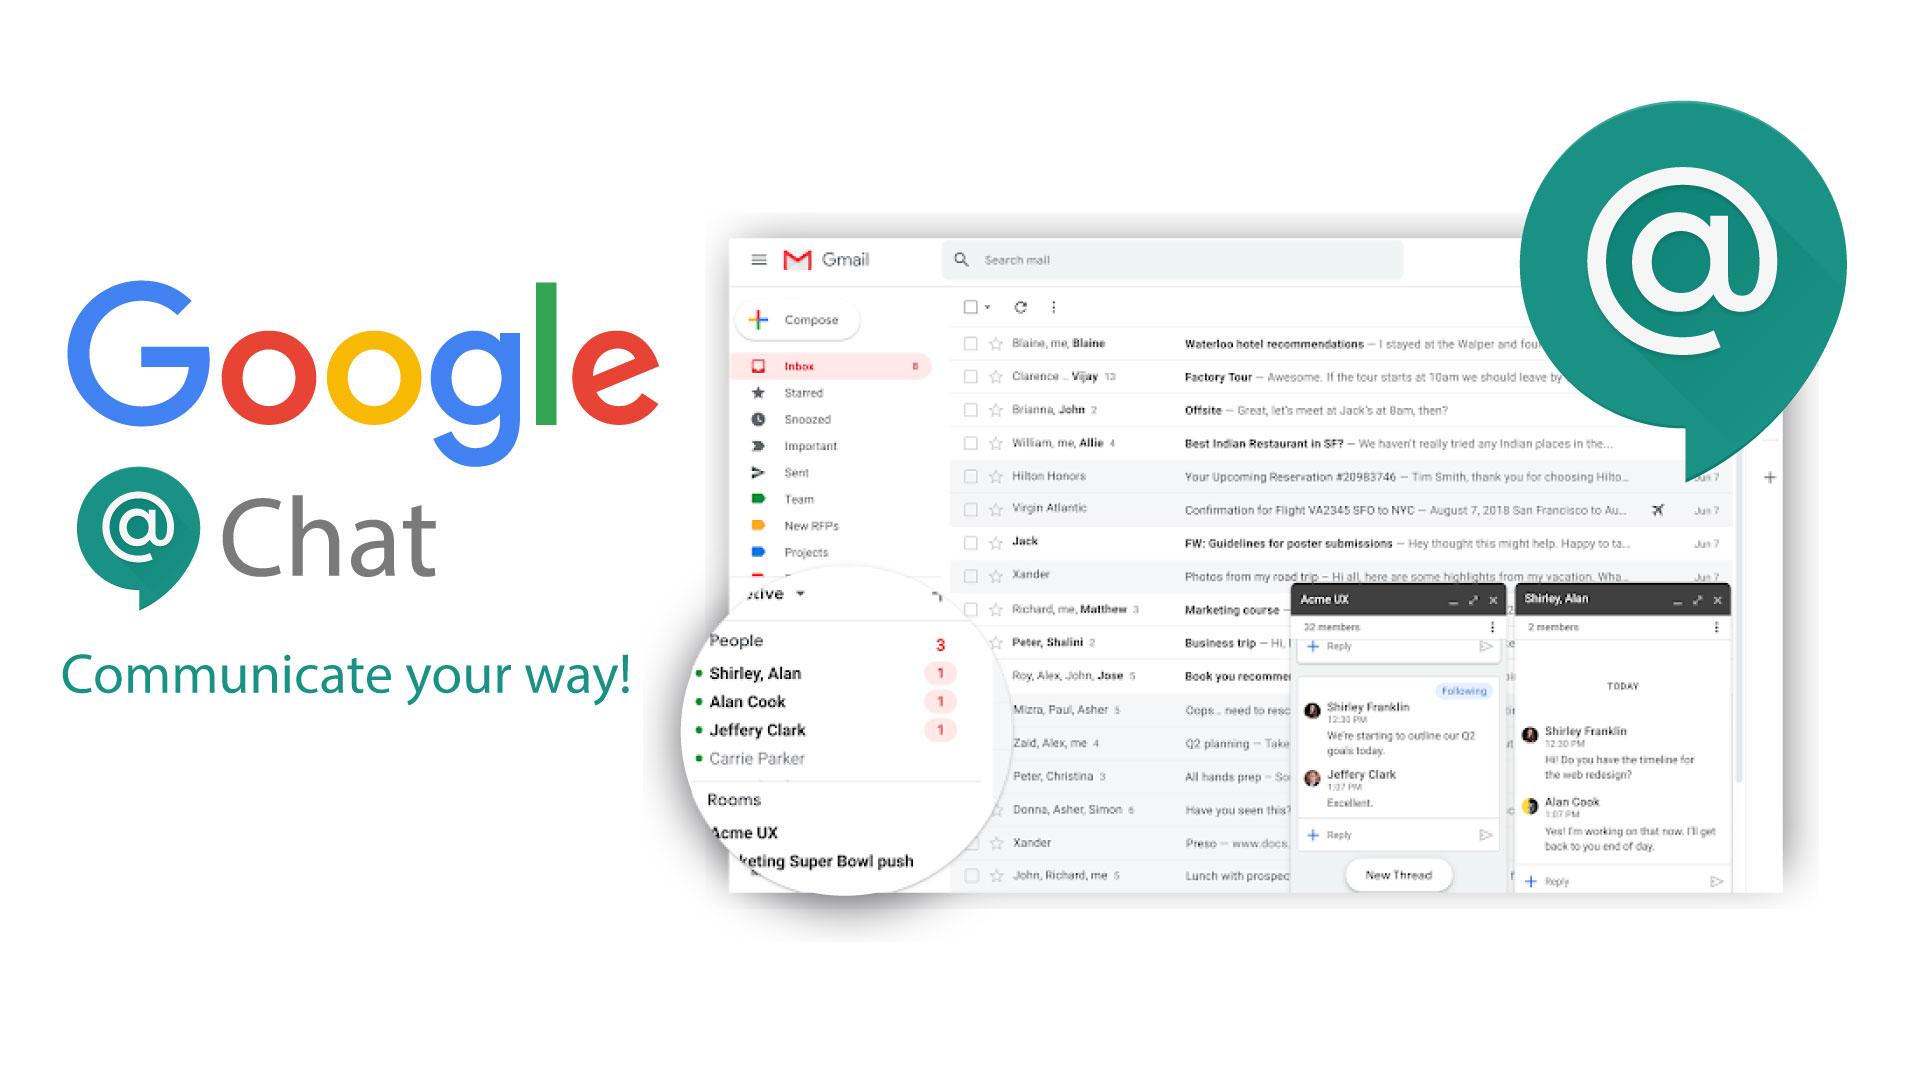 Communicate your way with Google Chat! | Information Services and ...